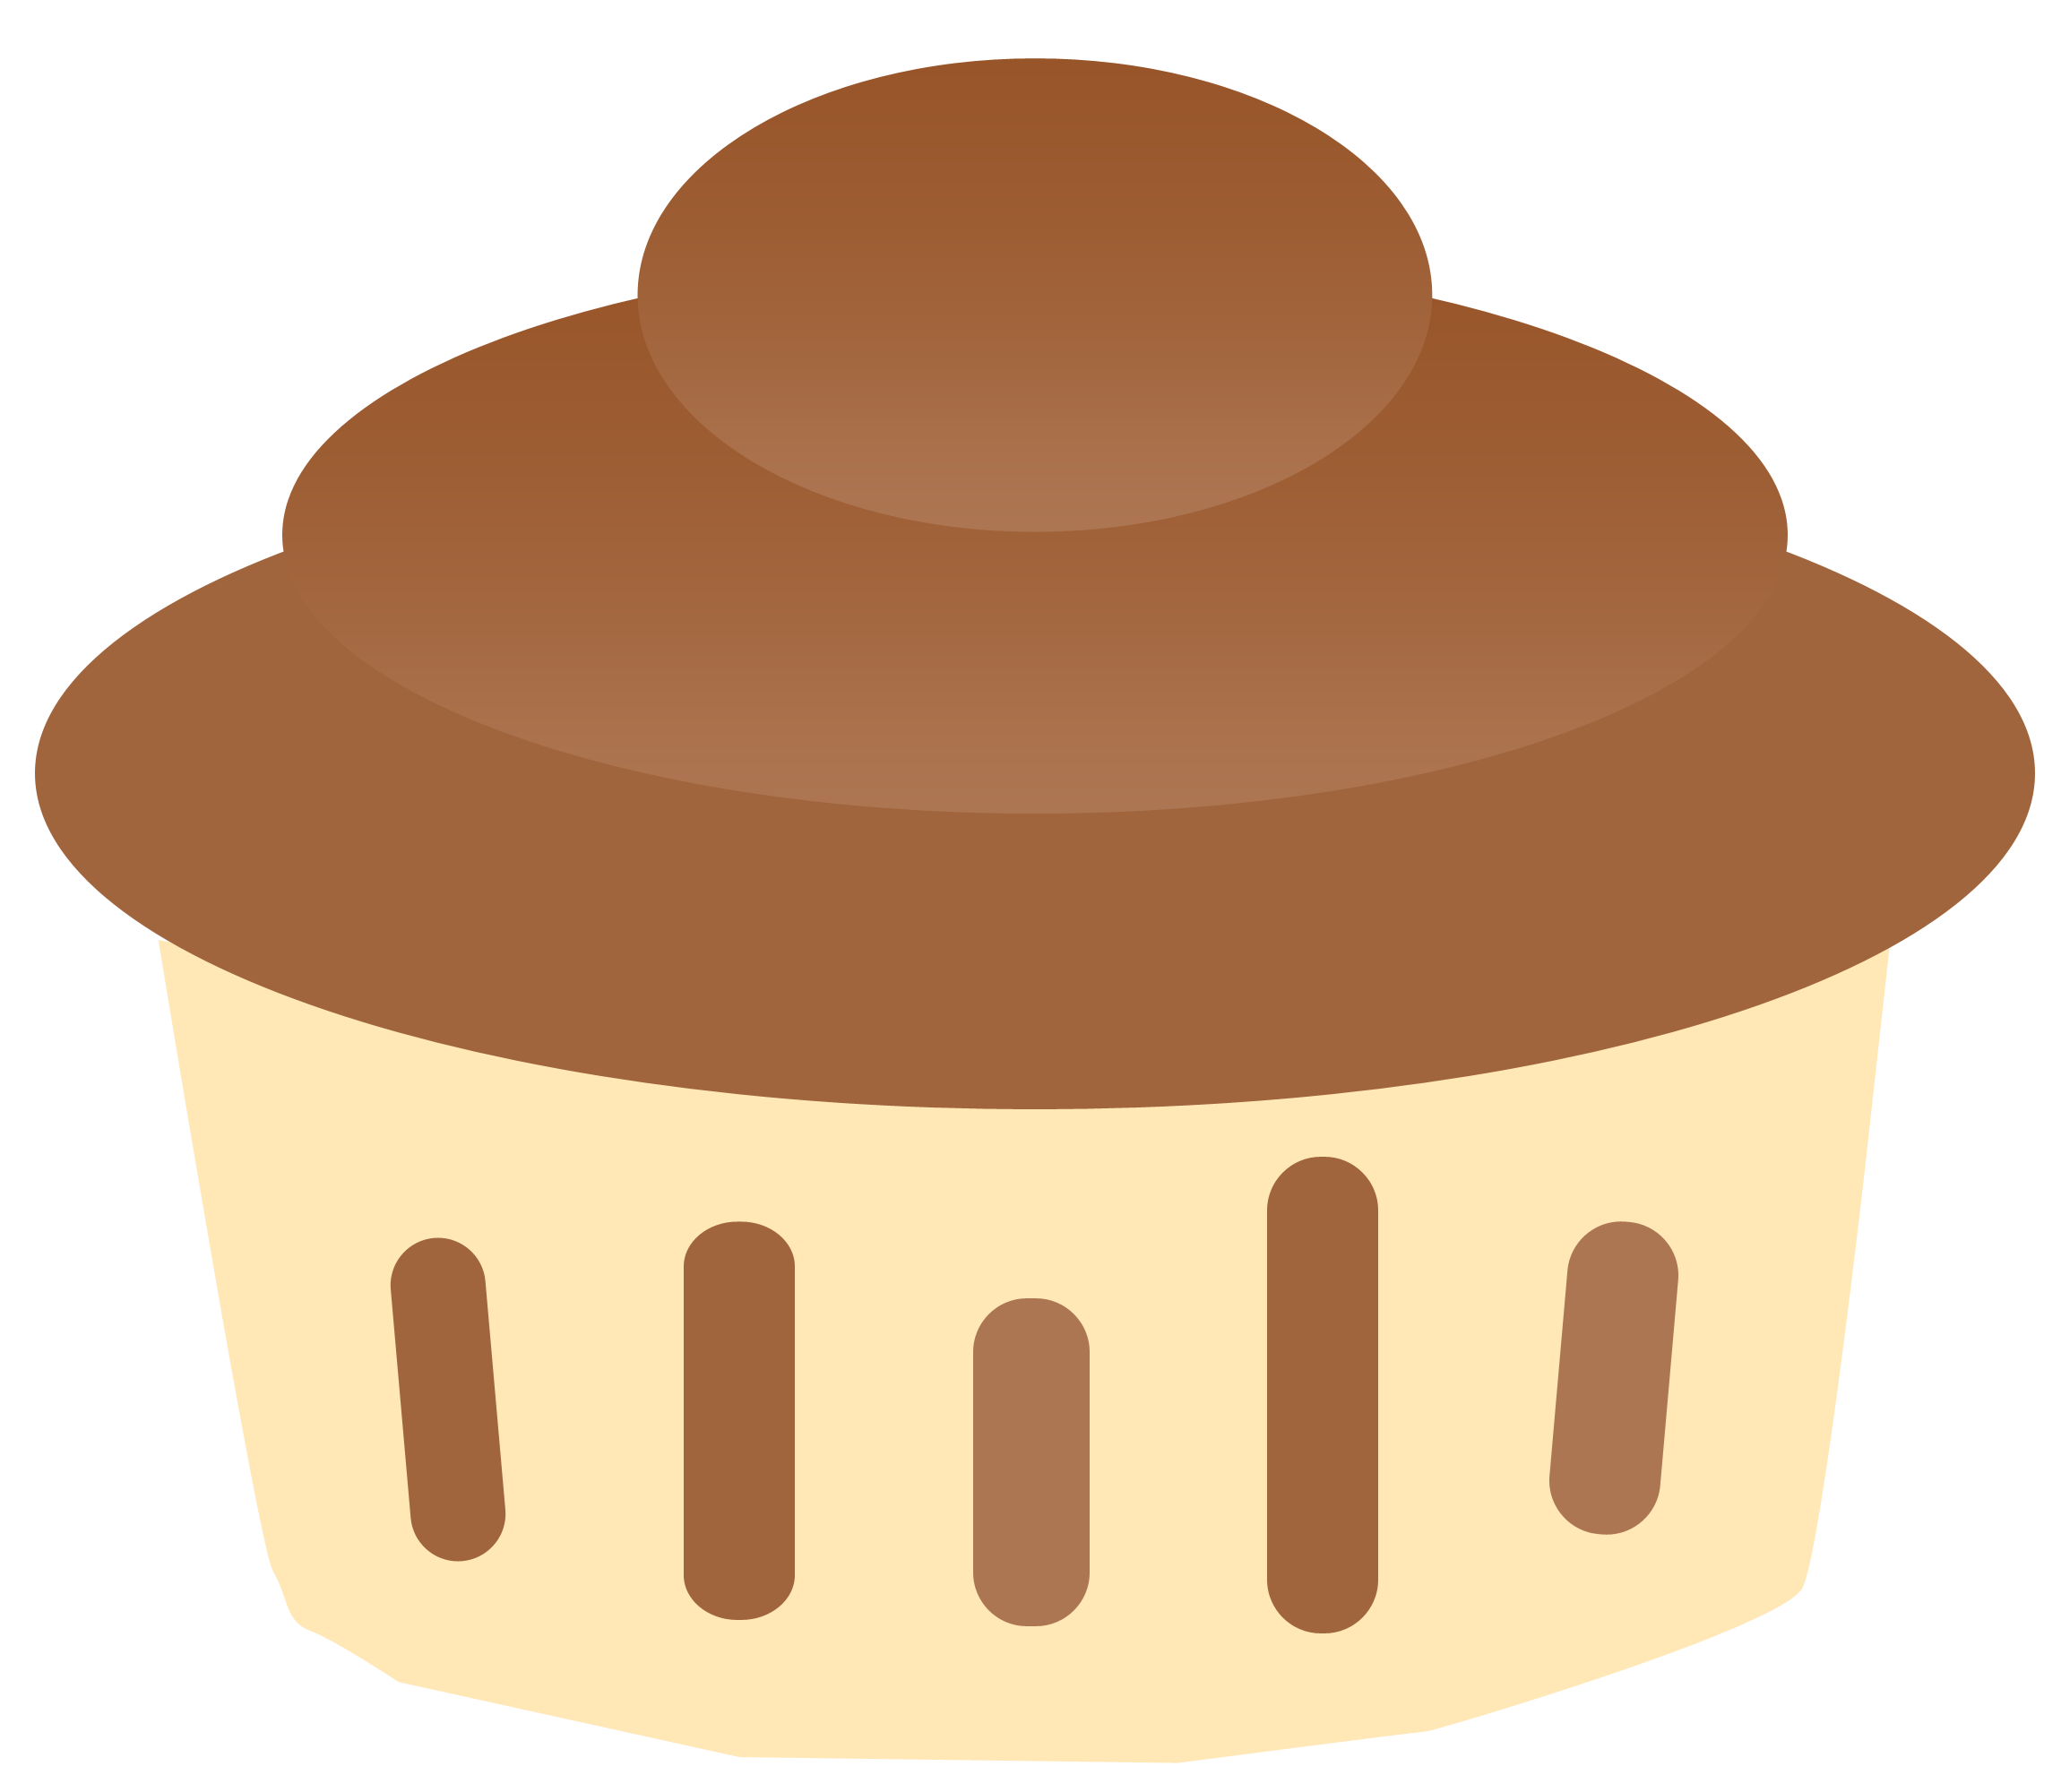 Brownie cupcake pencil and. Cupcakes clipart baking